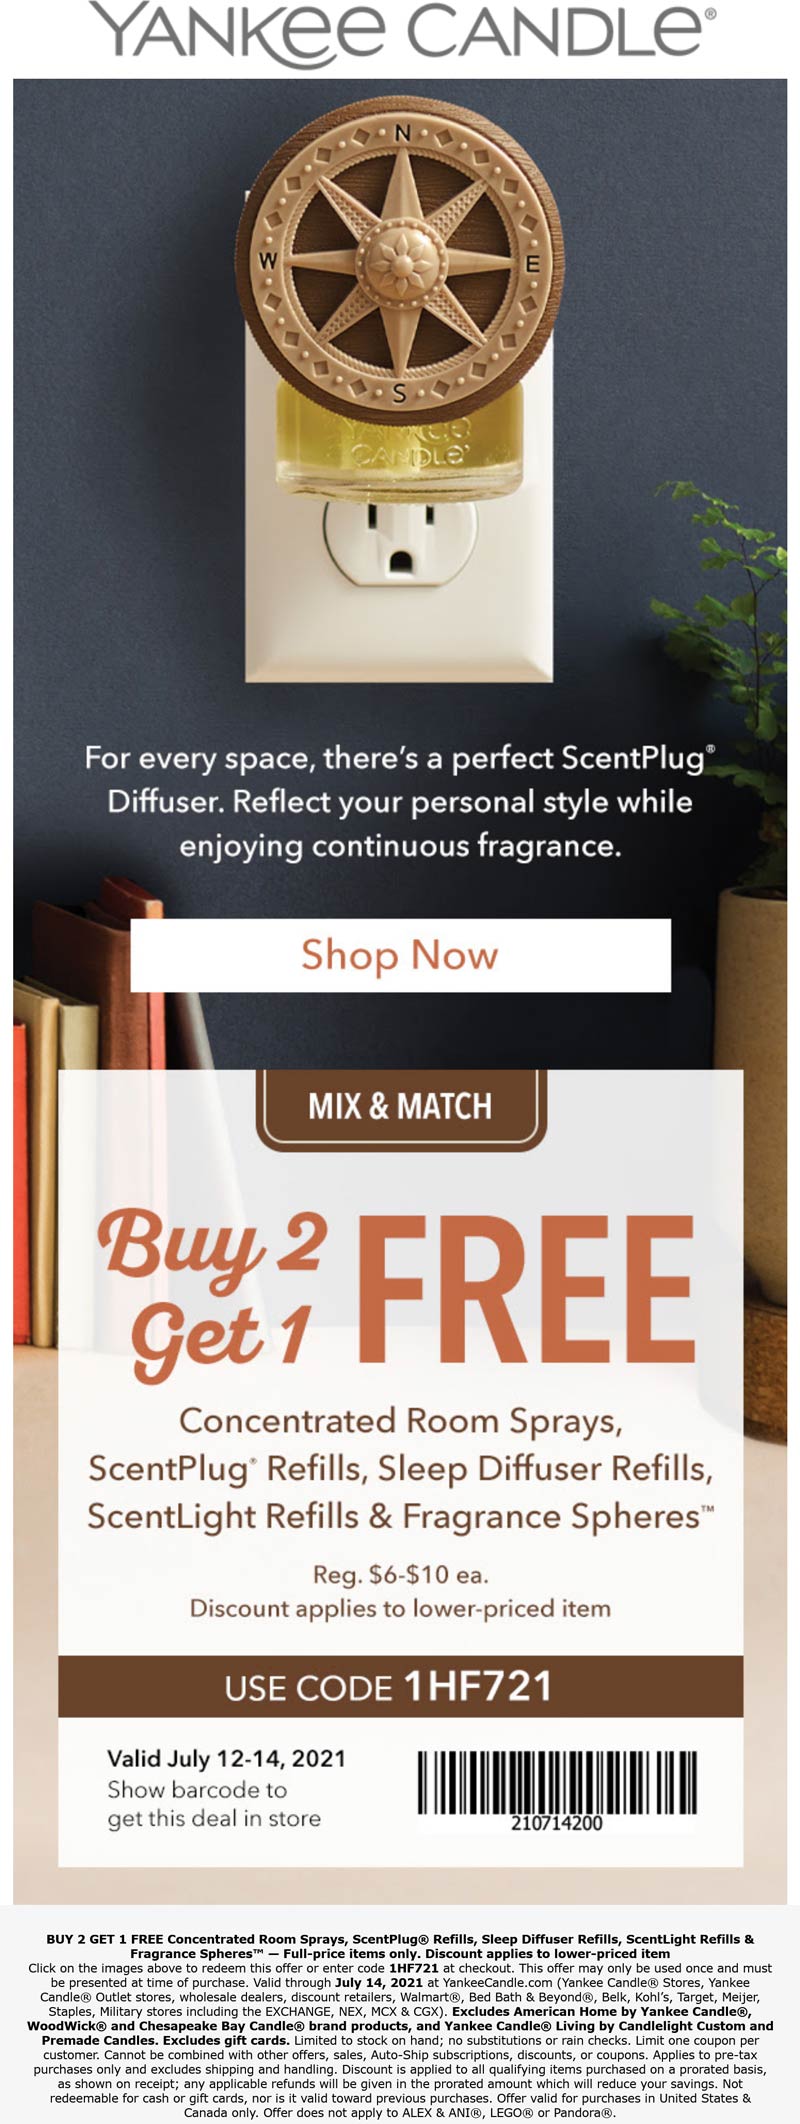 Yankee Candle stores Coupon  3rd room spray or refill free at Yankee Candle, or online via promo code 1HF721 #yankeecandle 